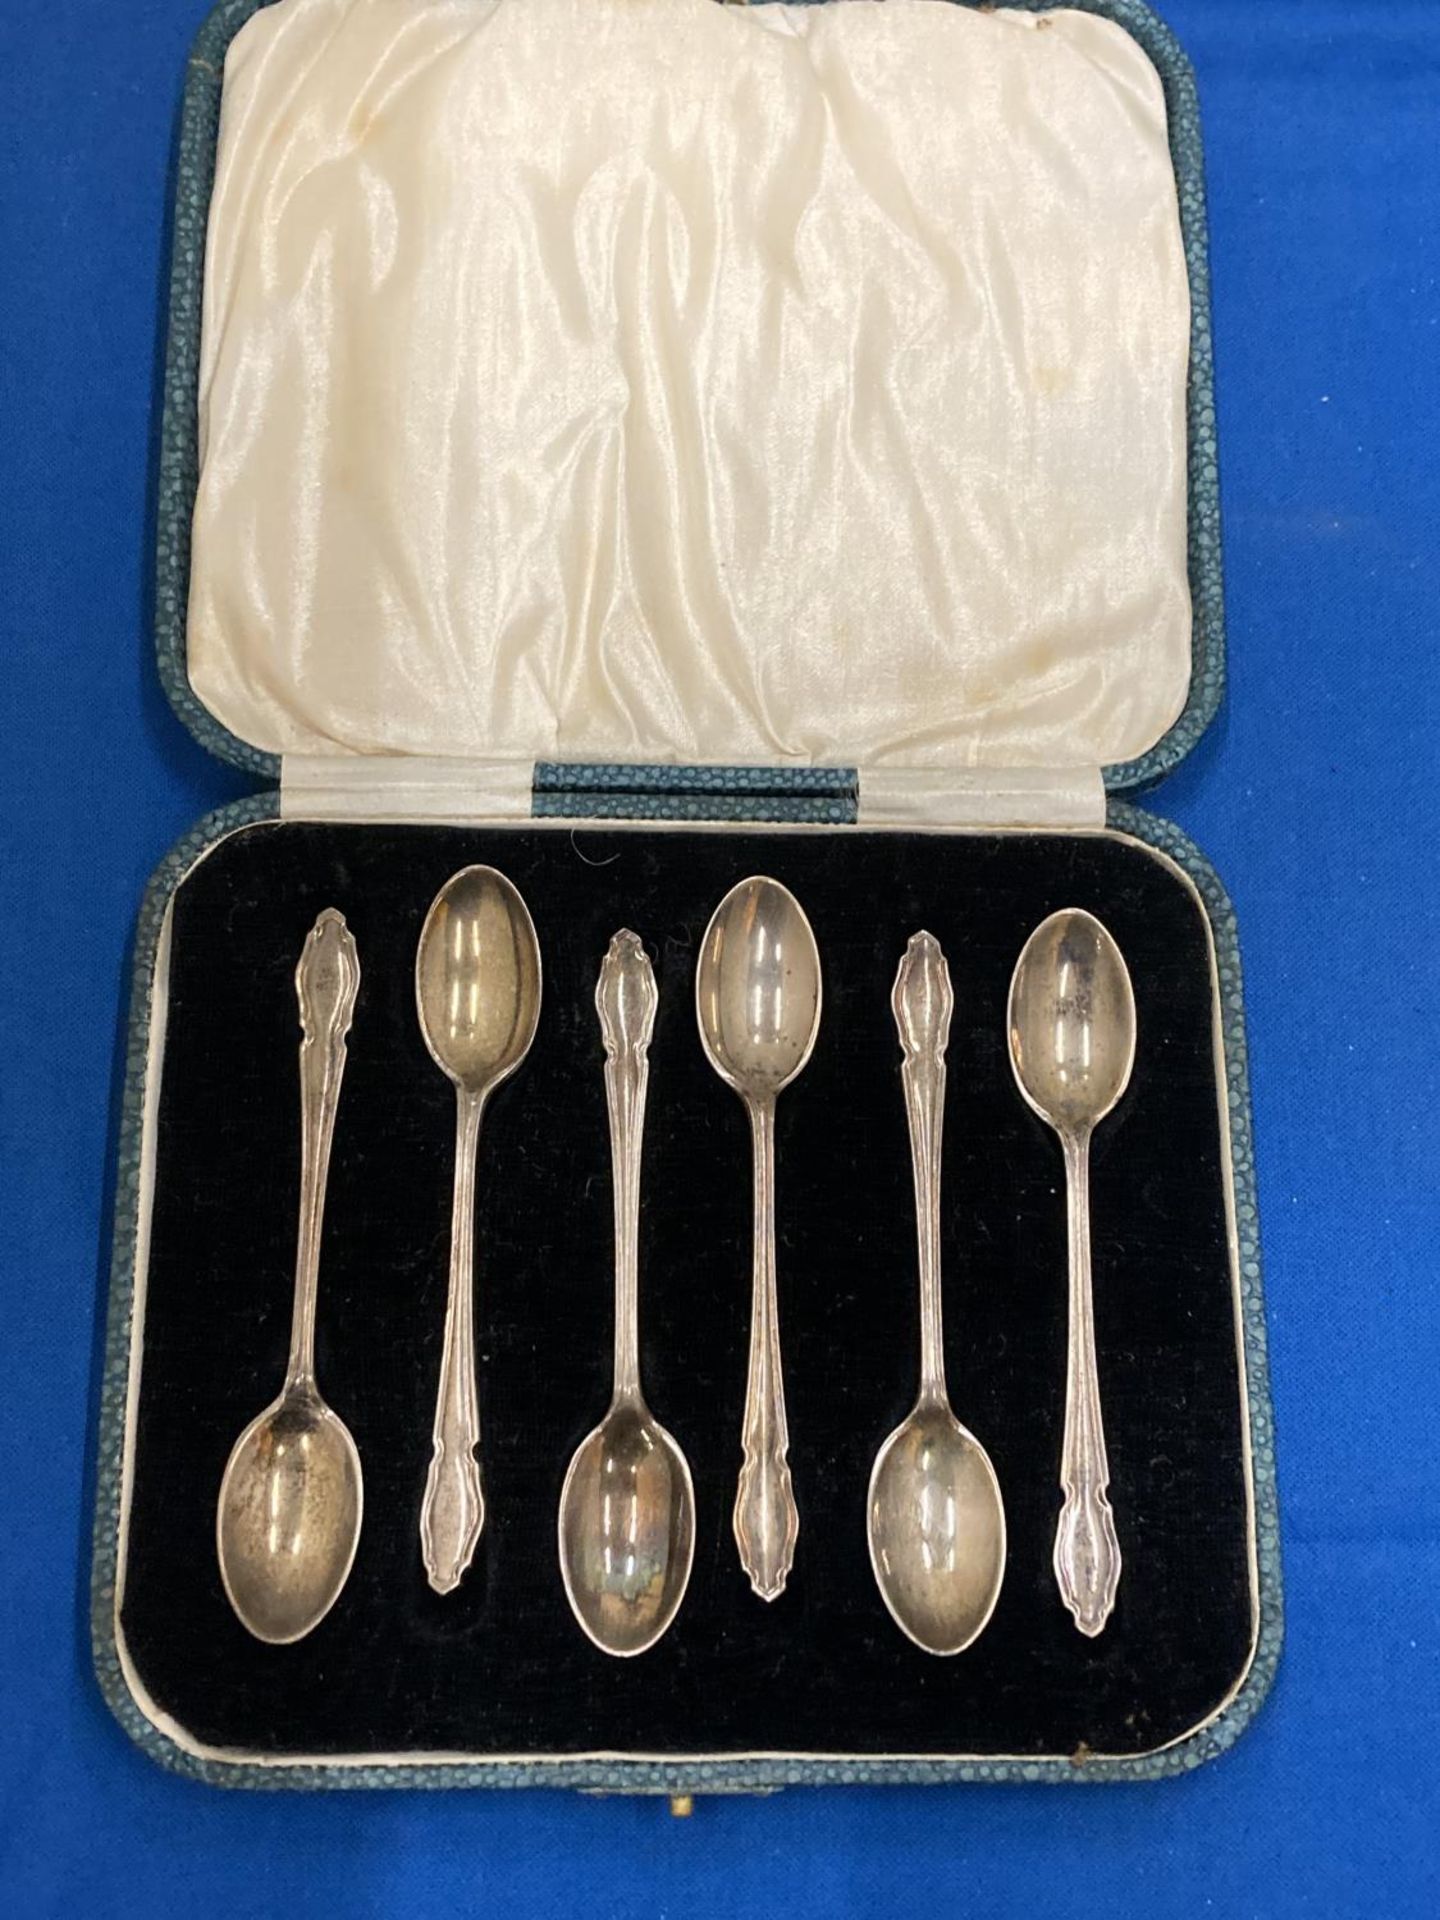 A SET OF SIX HALLMARKED LONDON SILVER COFFEE SPOONS IN A PRESENTATION CASE